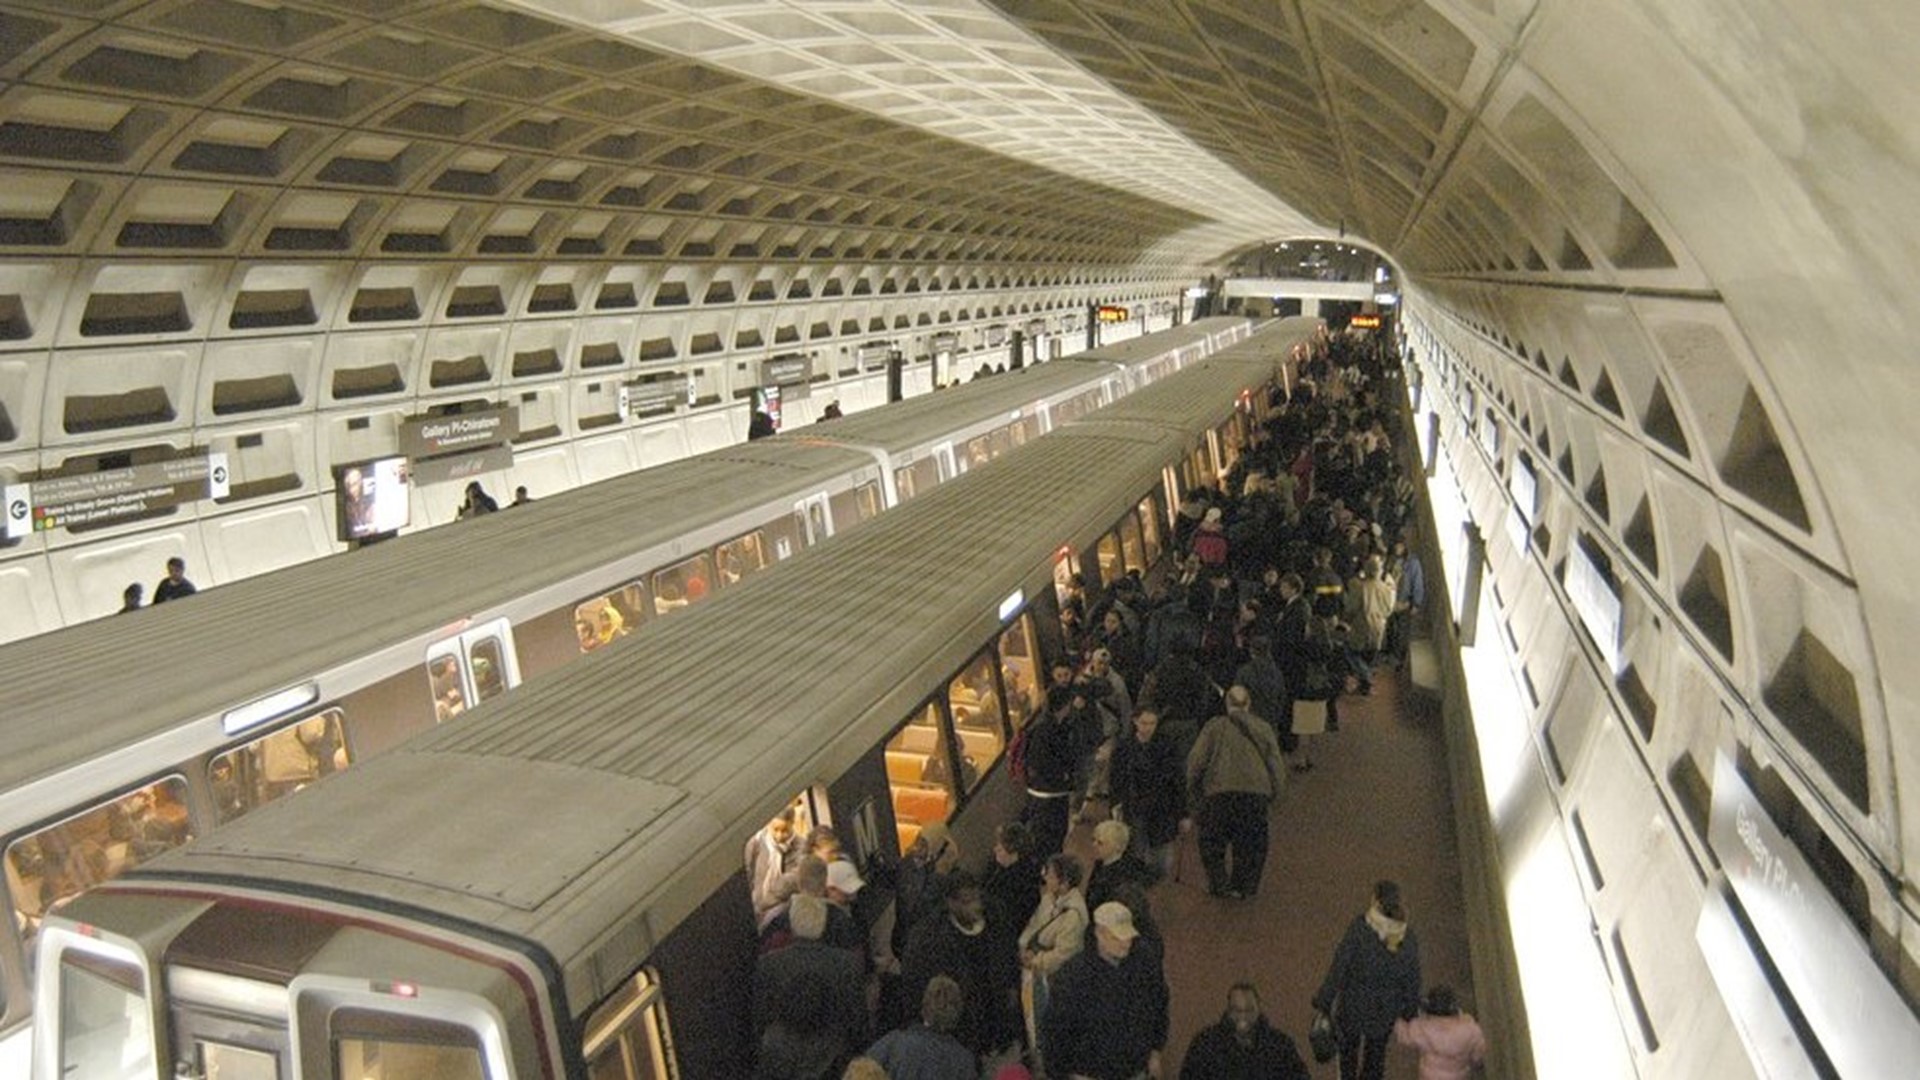 You've heard about the push to get Metro to bring back its late night trains. It still hasn't happened.
Metro suggested subsdizing trips for late night workers -- who rely on other transportation to get home.